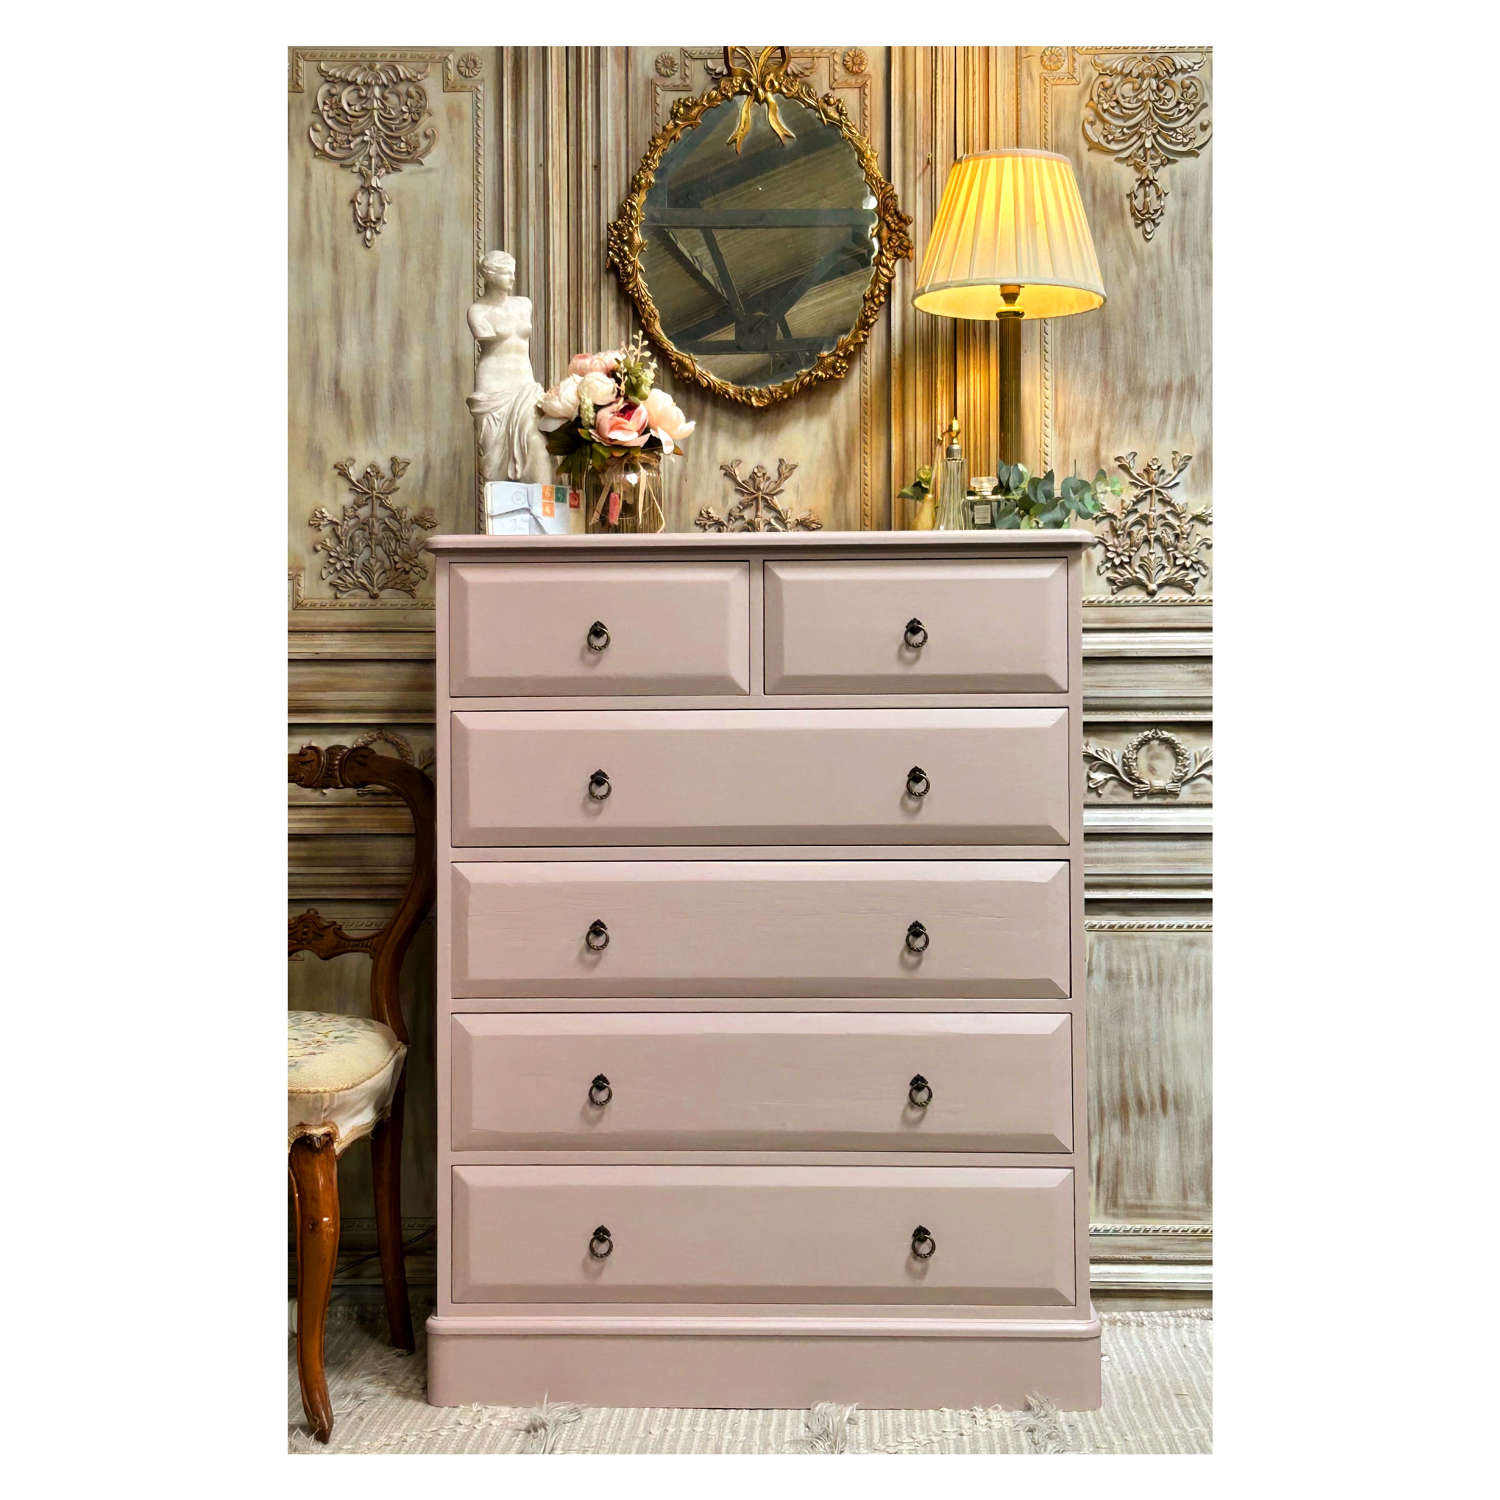 Painted Pine Chest of Drawers in Peach Blossom by Little Greene